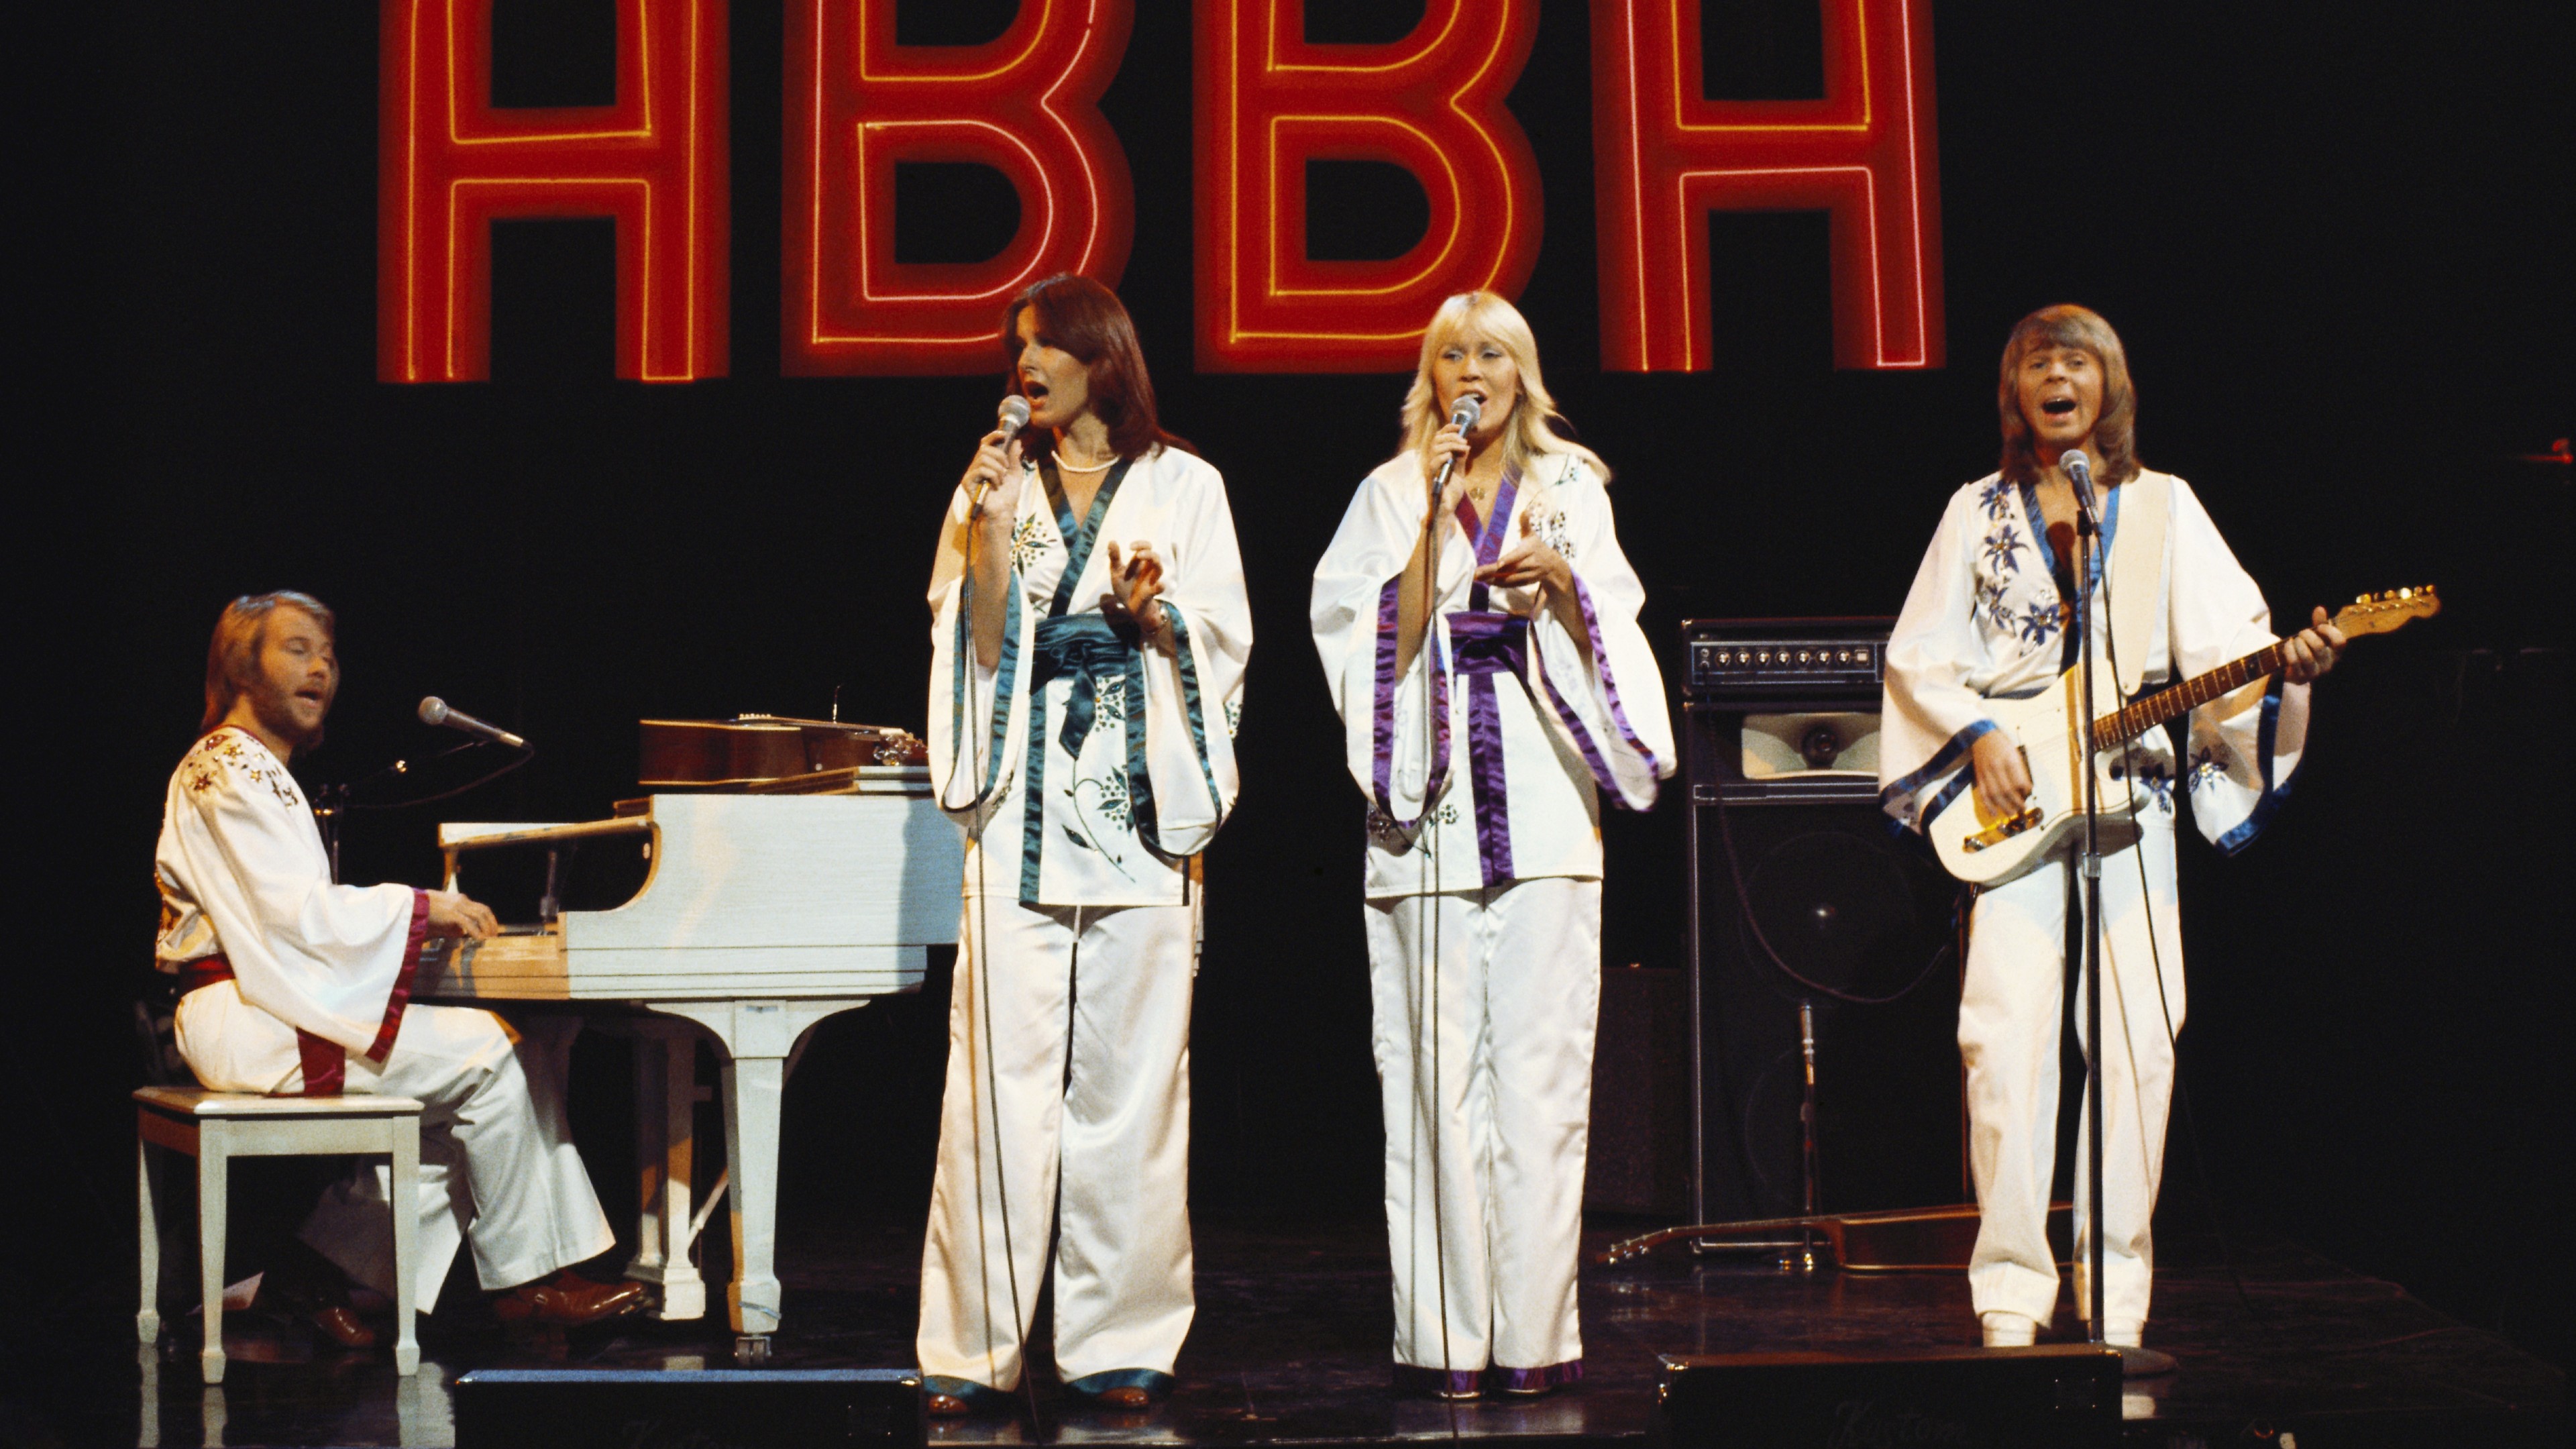 Abba on stage in the 1970s